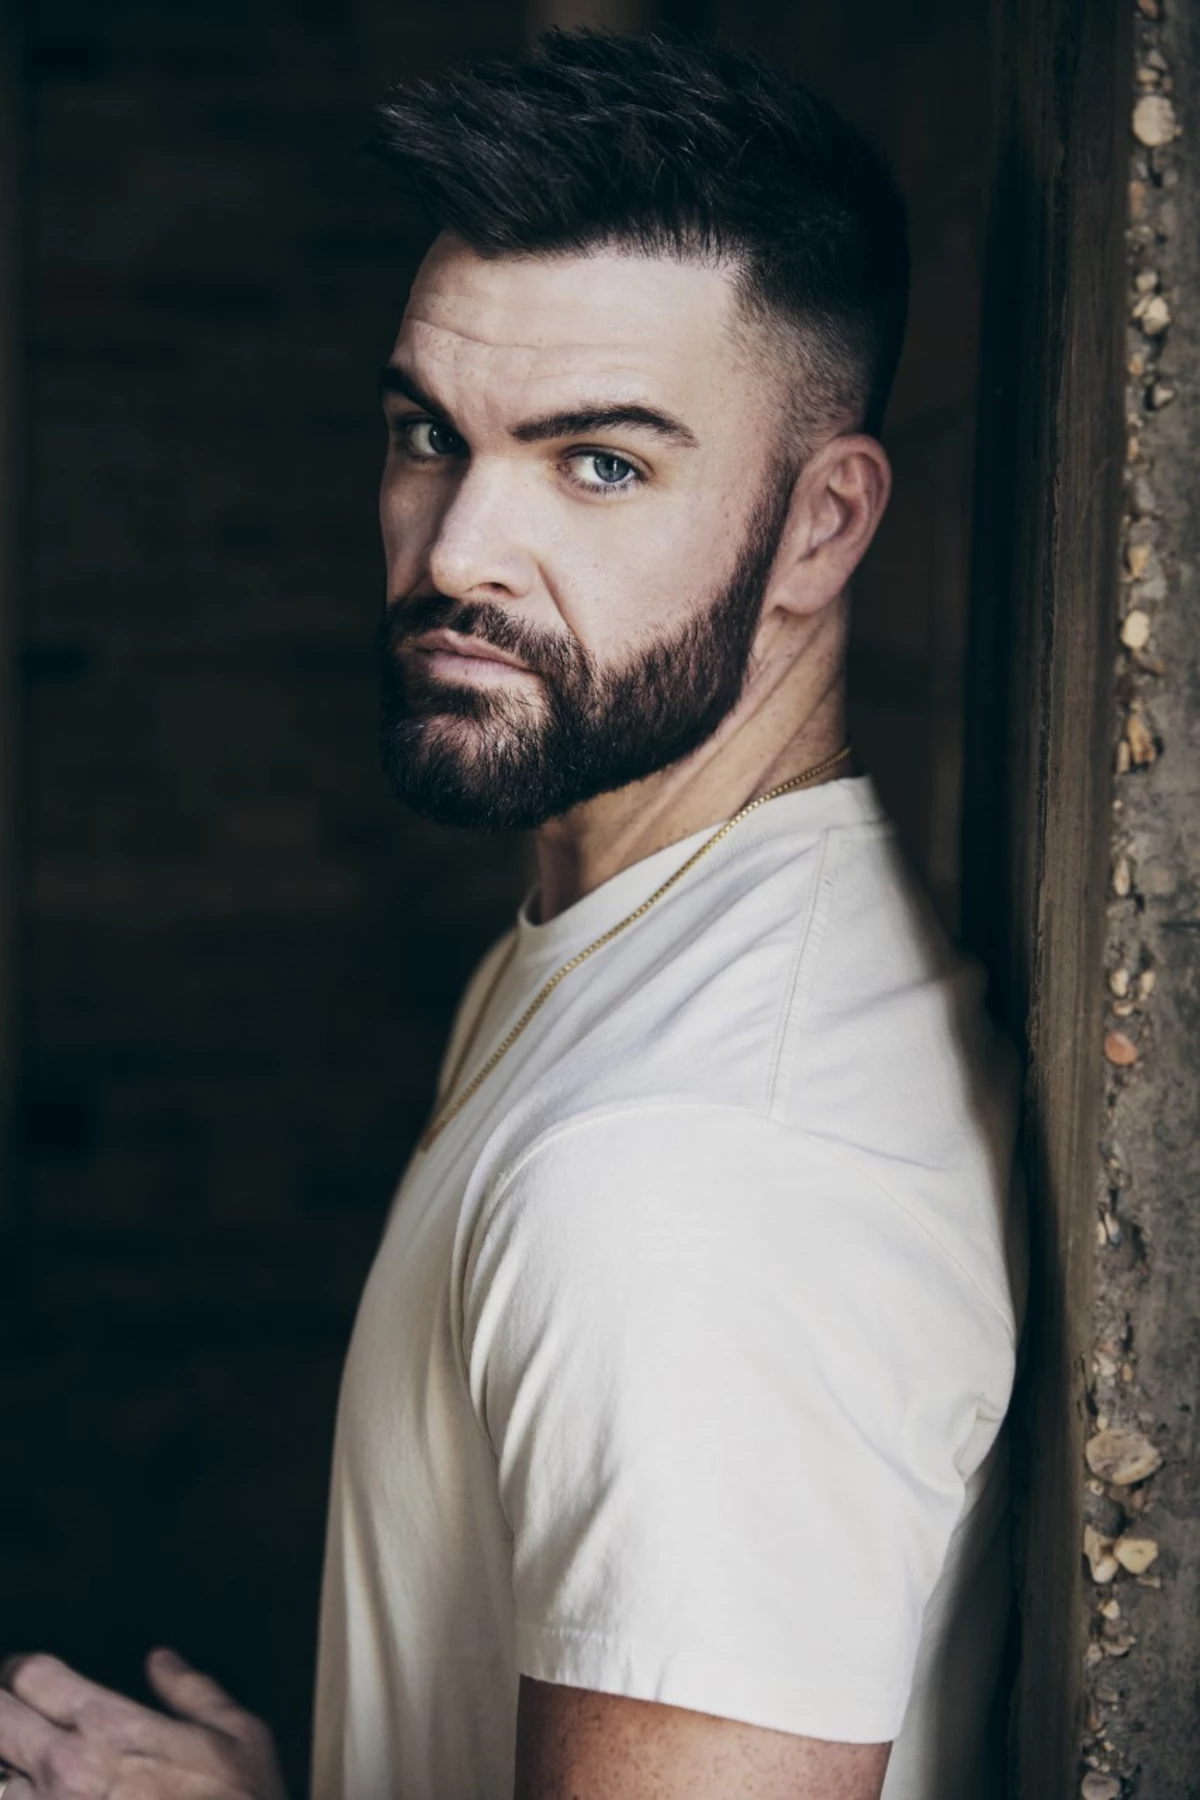 Dylan Scott at Five Flags Center in Dubuque